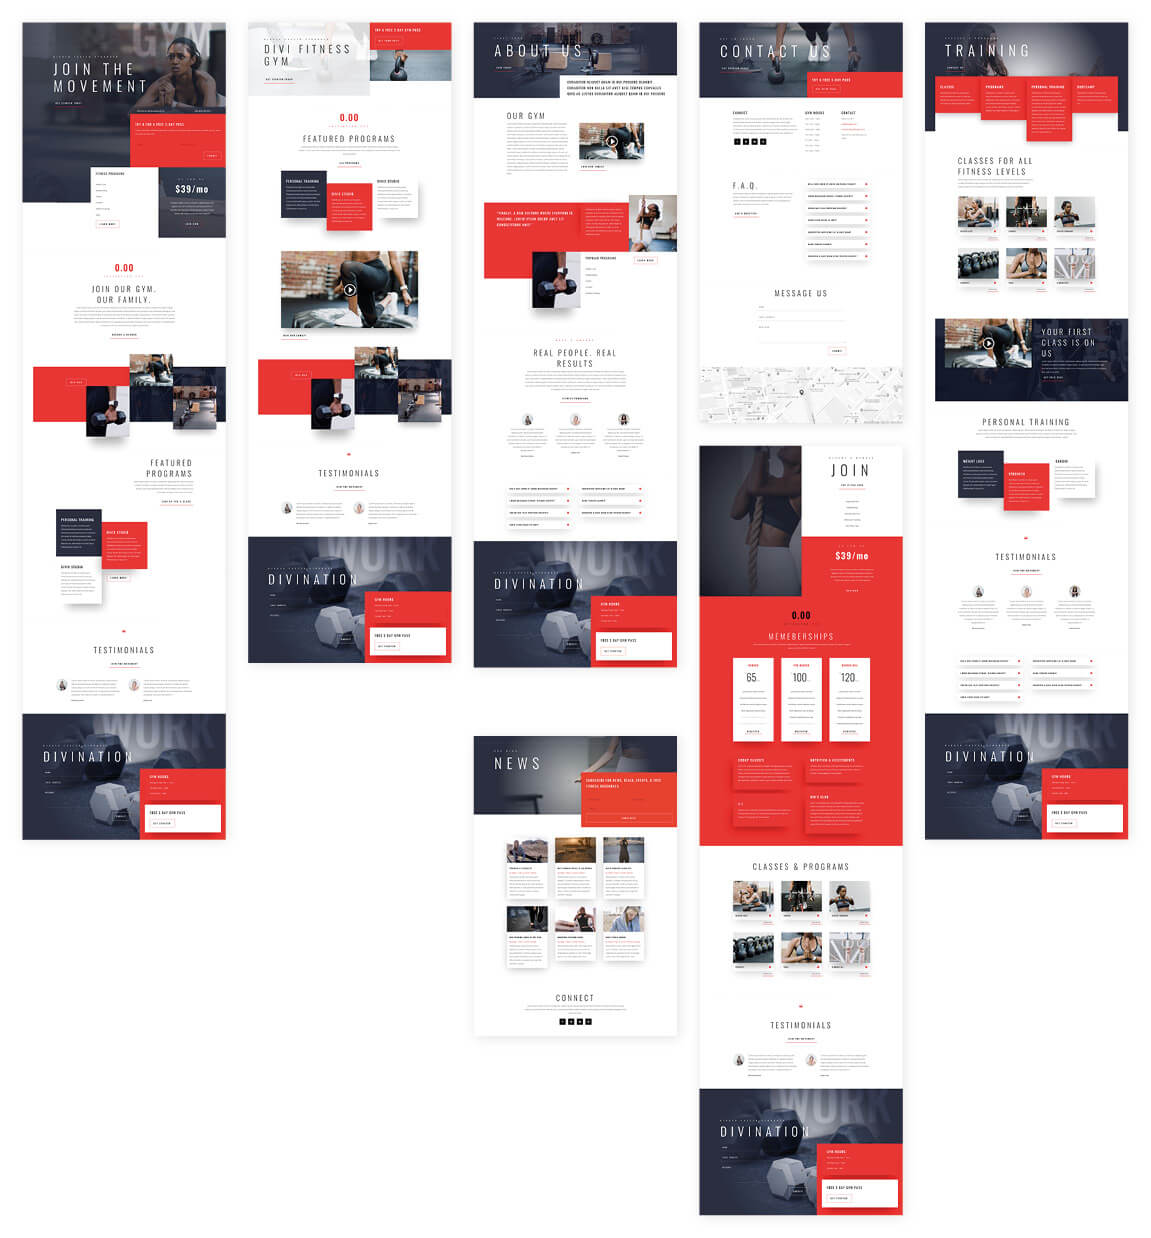 Free Fitness Gym Layout Pack Website Template for Divi